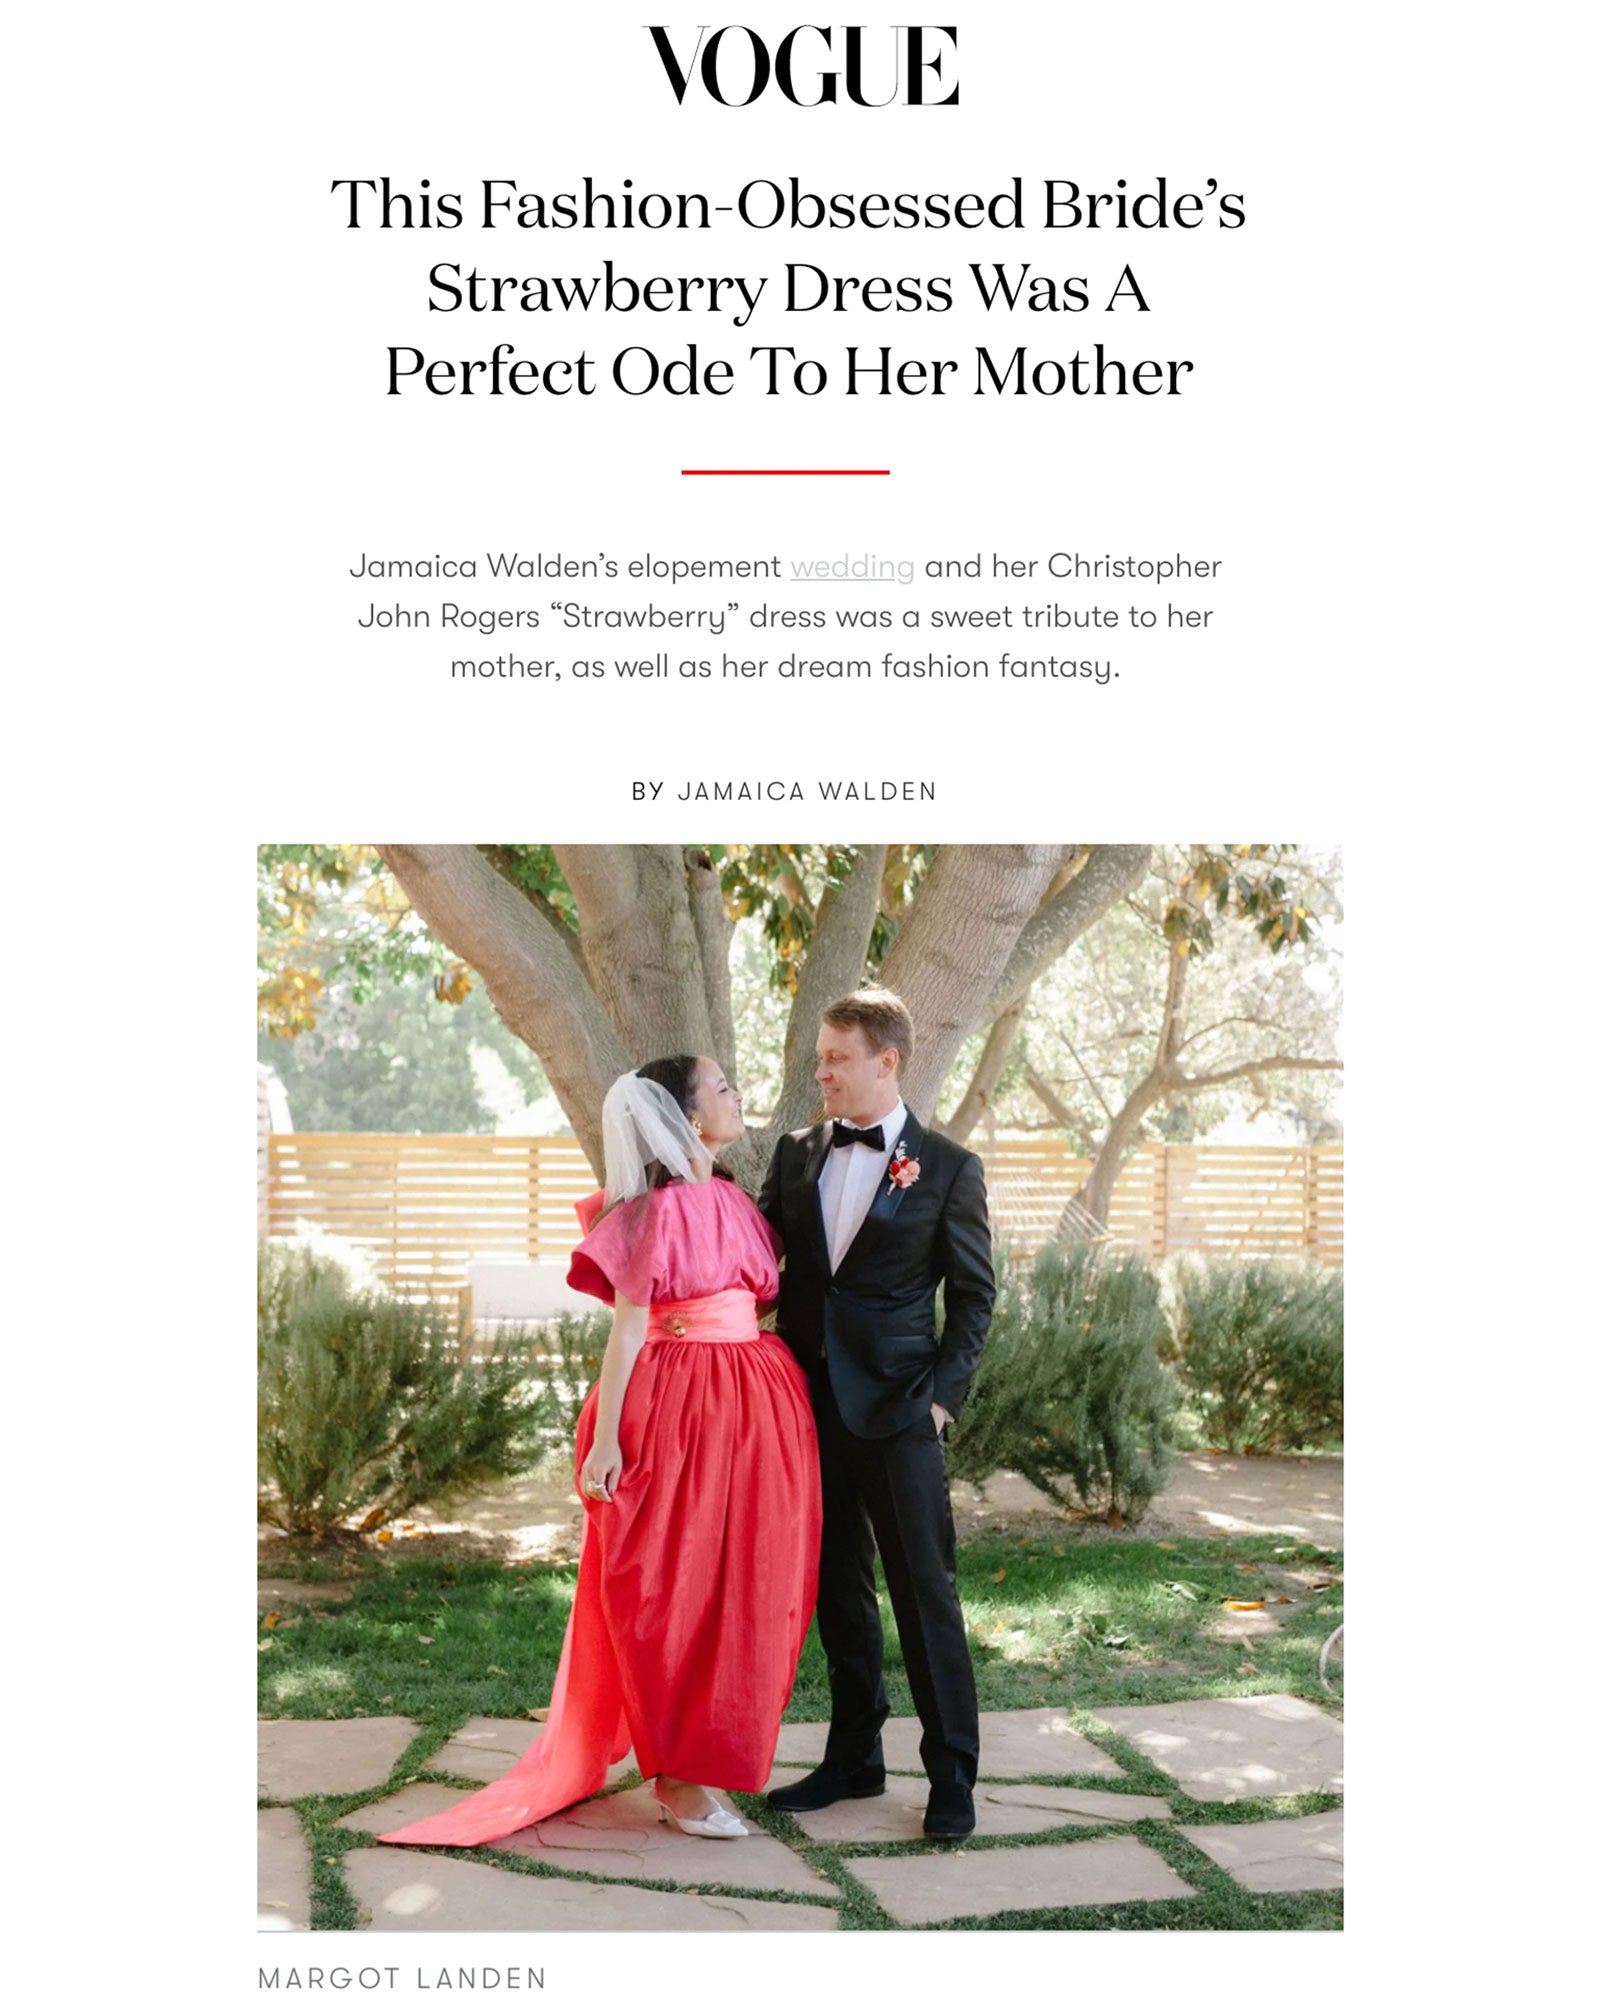 British Vogue: This Fashion-Obsessed Bride’s Strawberry Dress Was A Perfect Ode To Her Mother